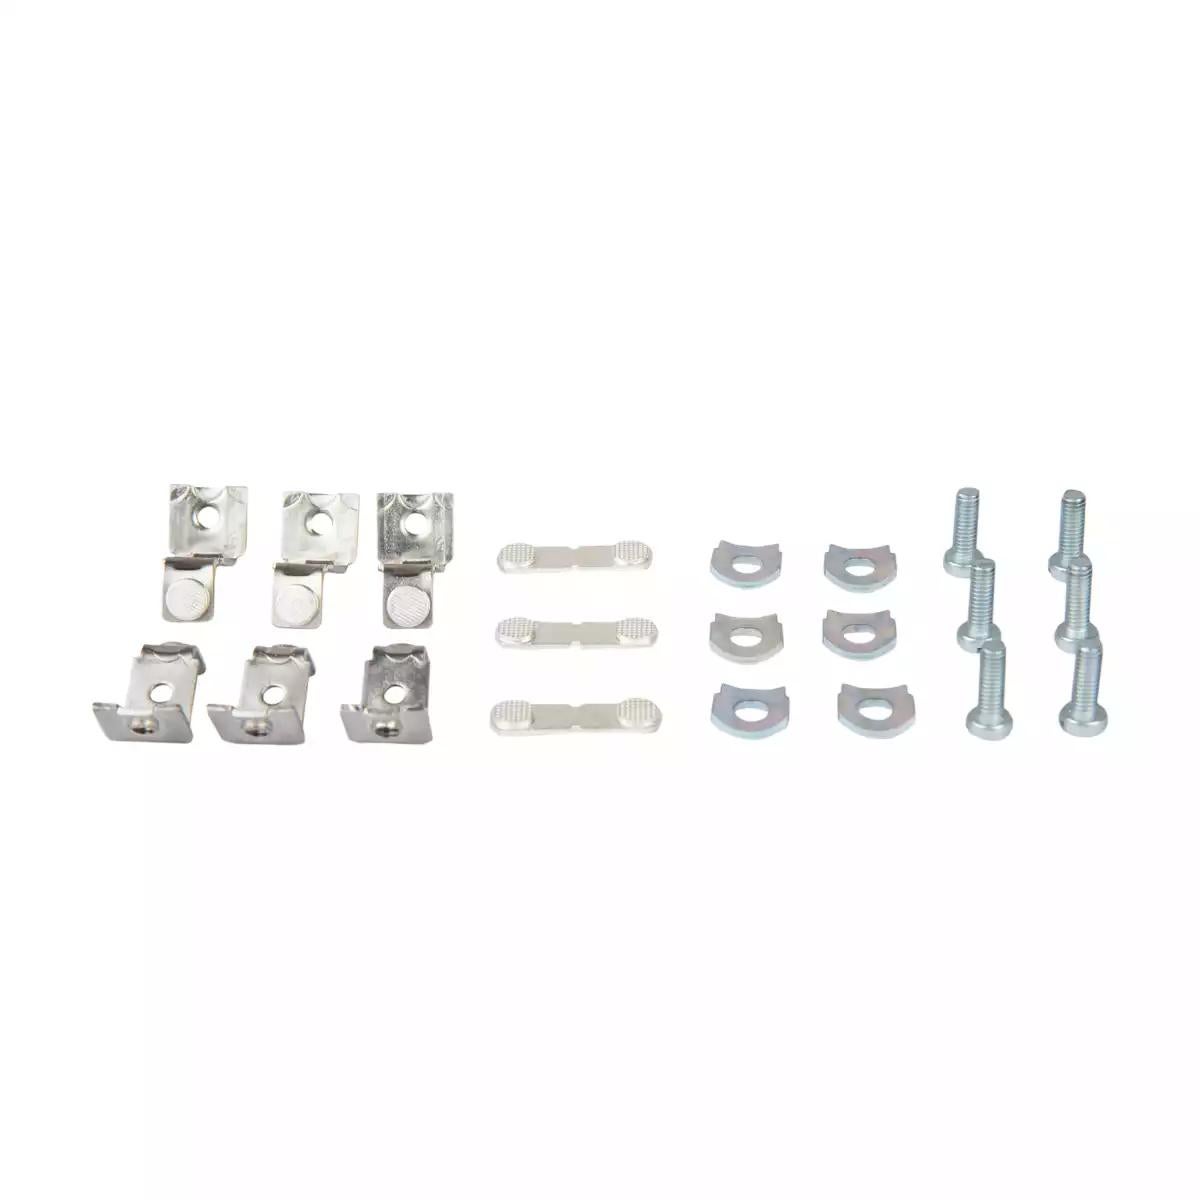 MNX 22 - Spare Contact Kit